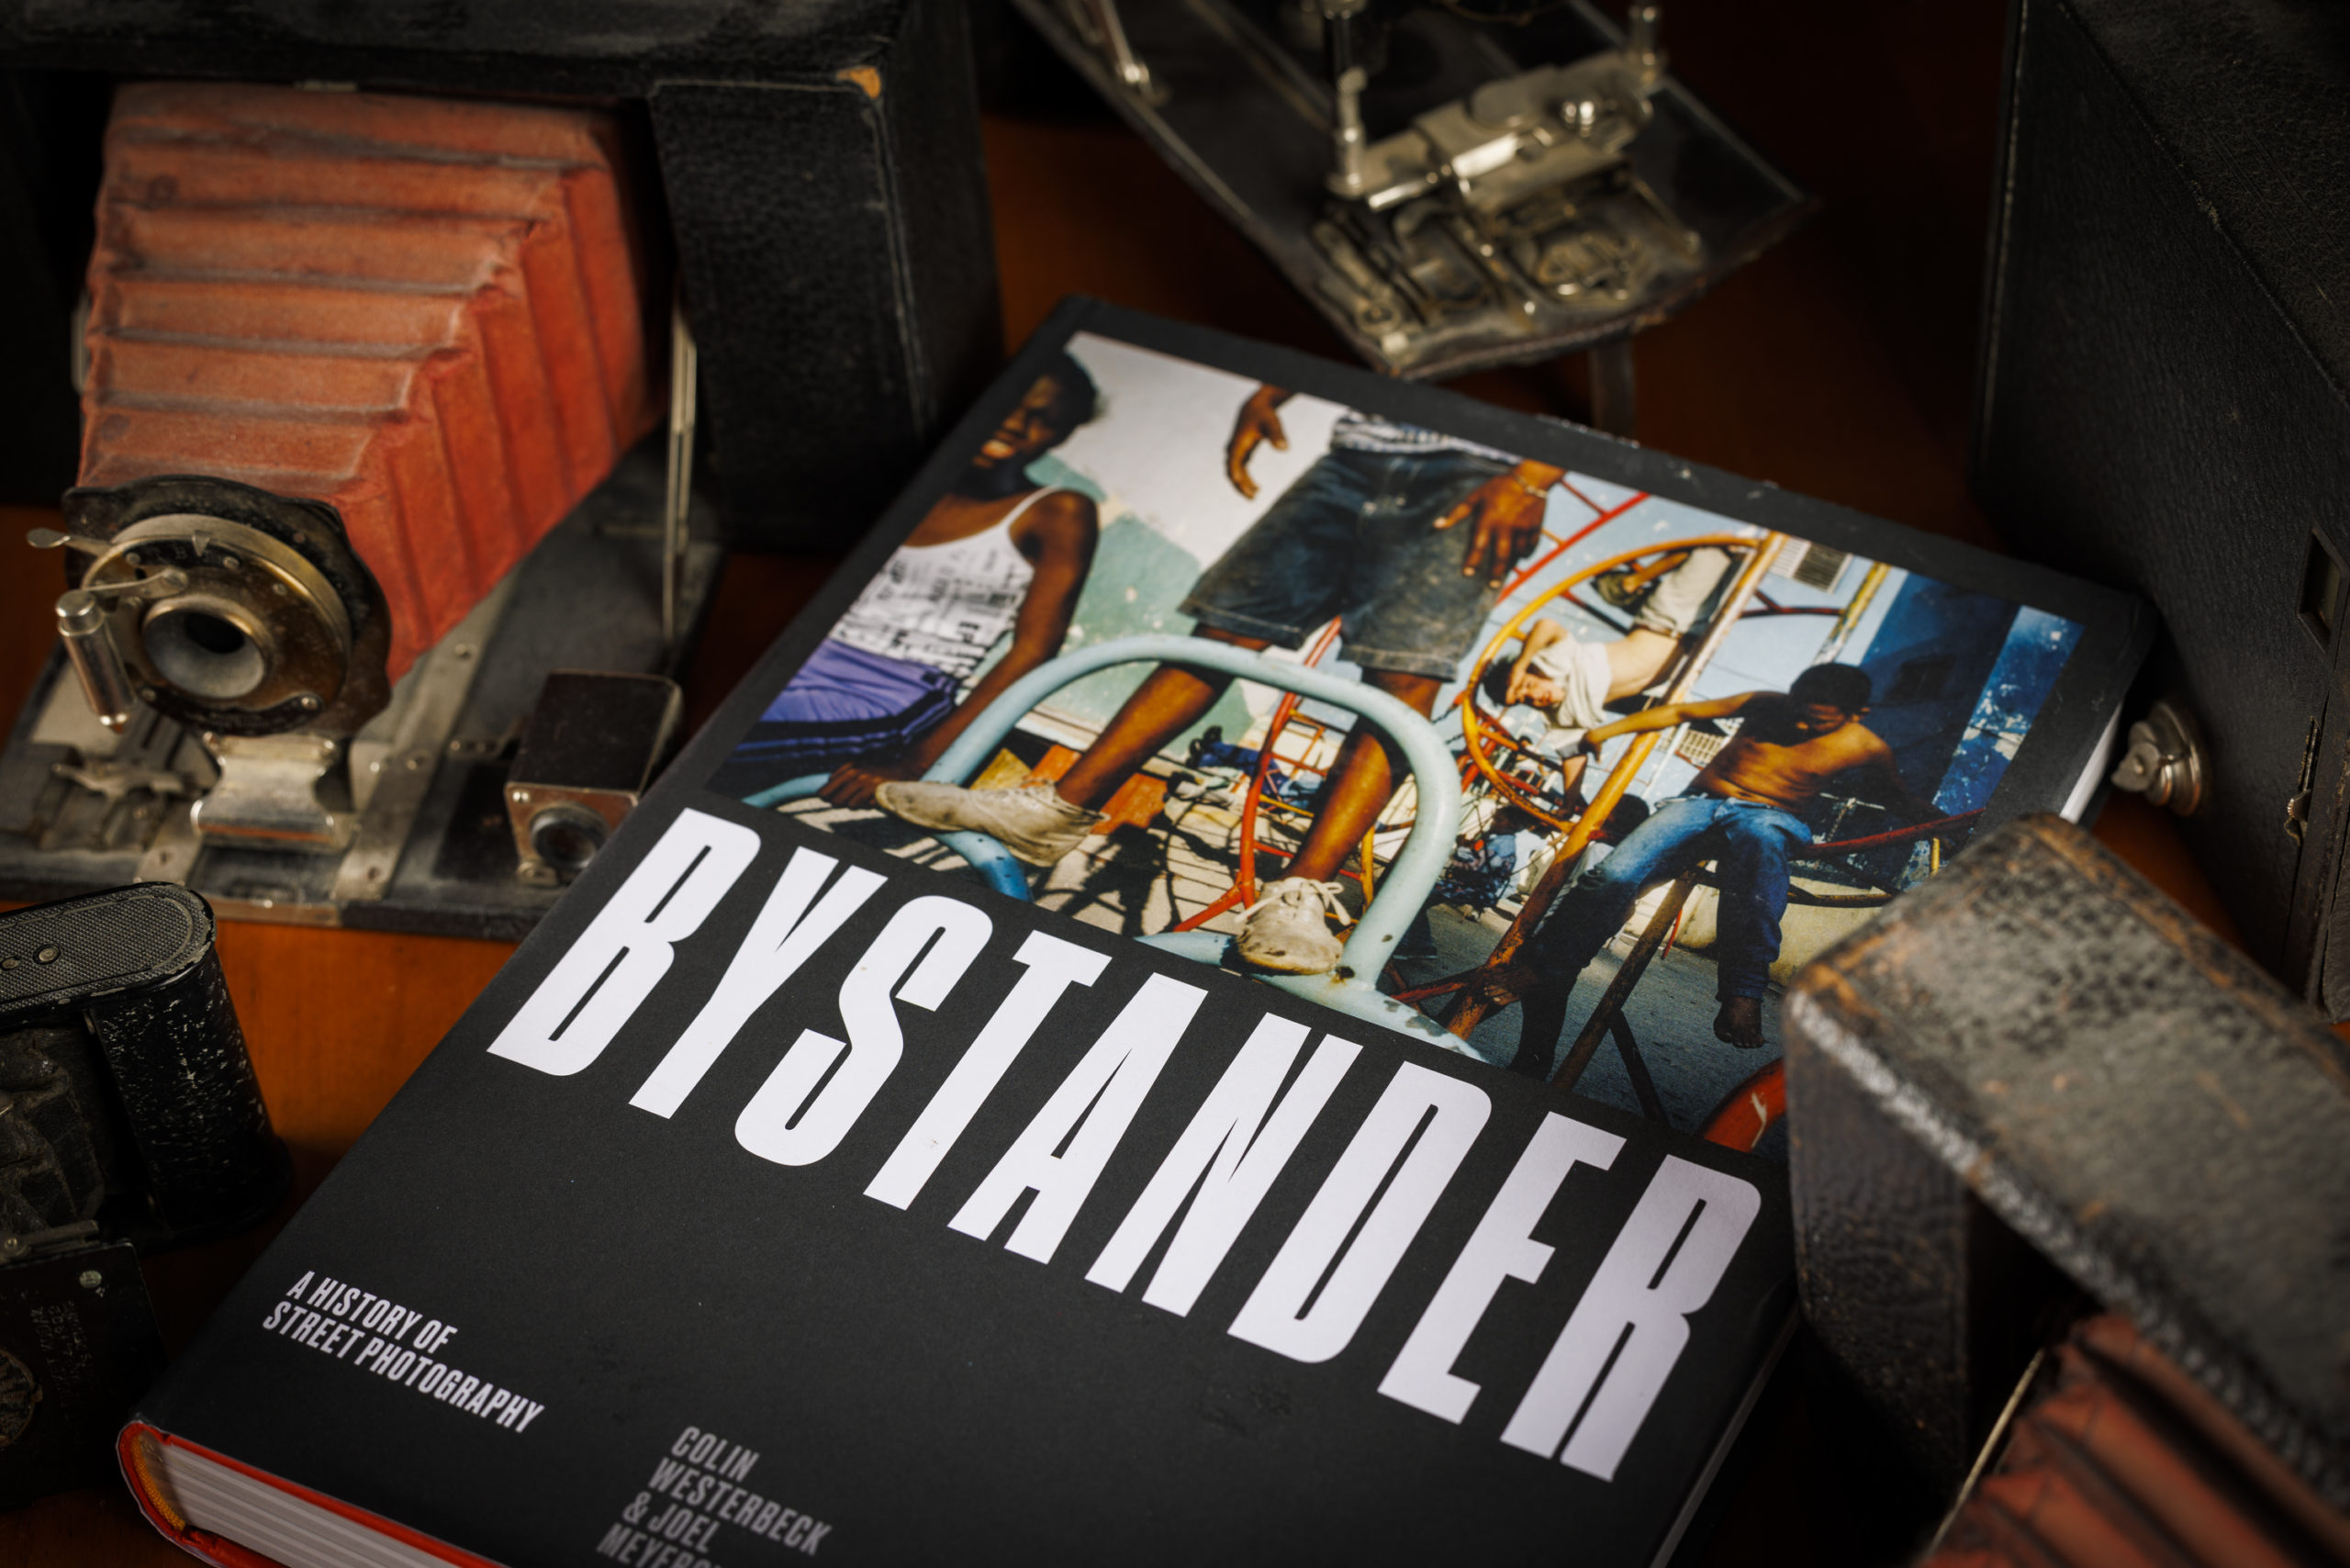 Bystander_Books_S1A0459-1-print